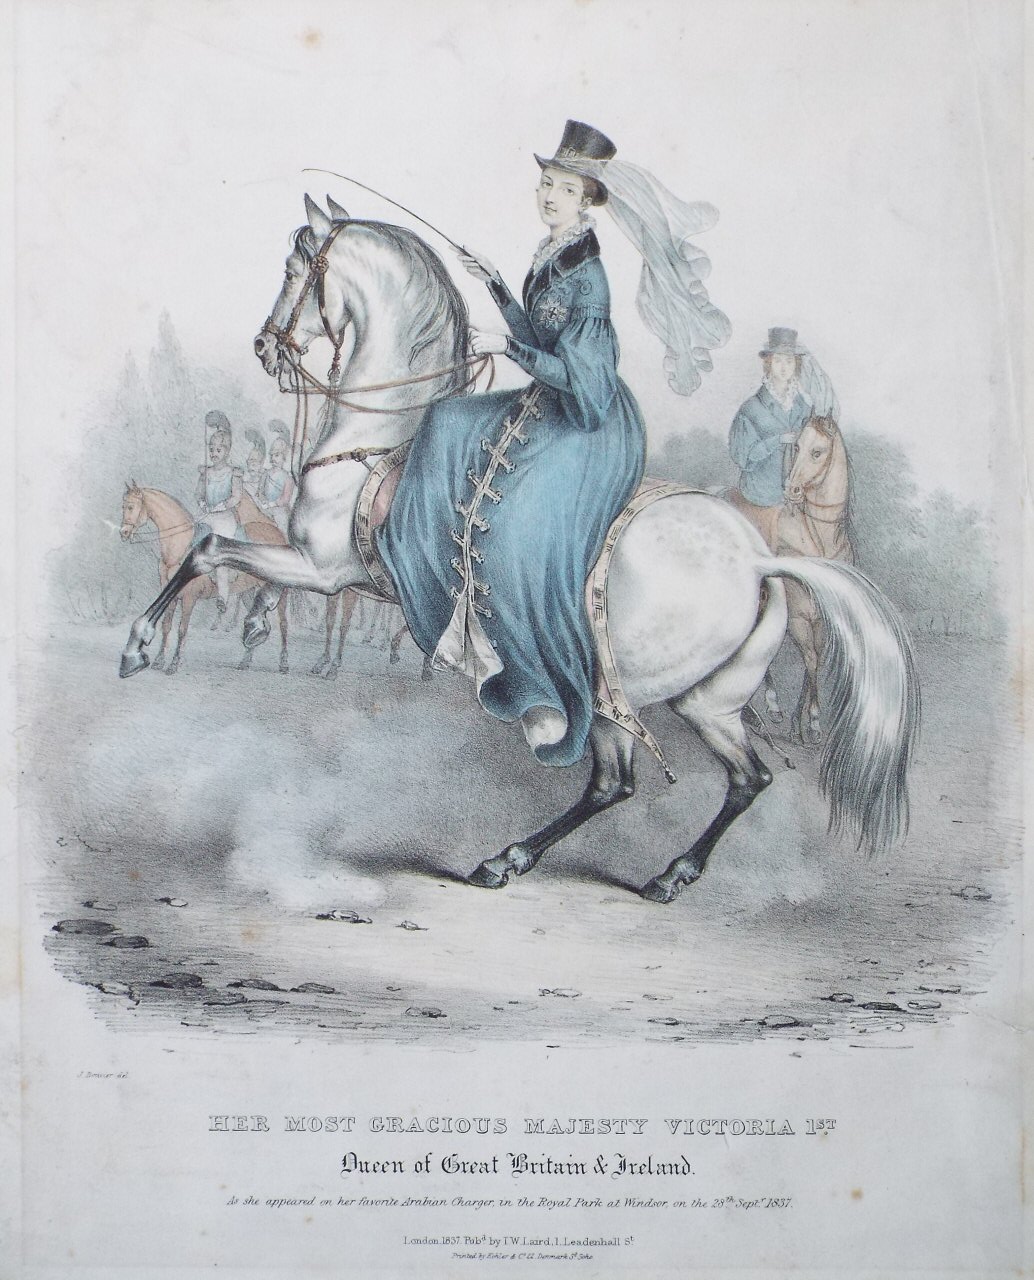 Lithograph - Her Most Gracious Majesty Victoria 1st, Queen of Great Britain & Ireland. As she appeared on her favorite Arabian Chager, in the Royal Park at Windsor, on the 28th Septr. 1837.